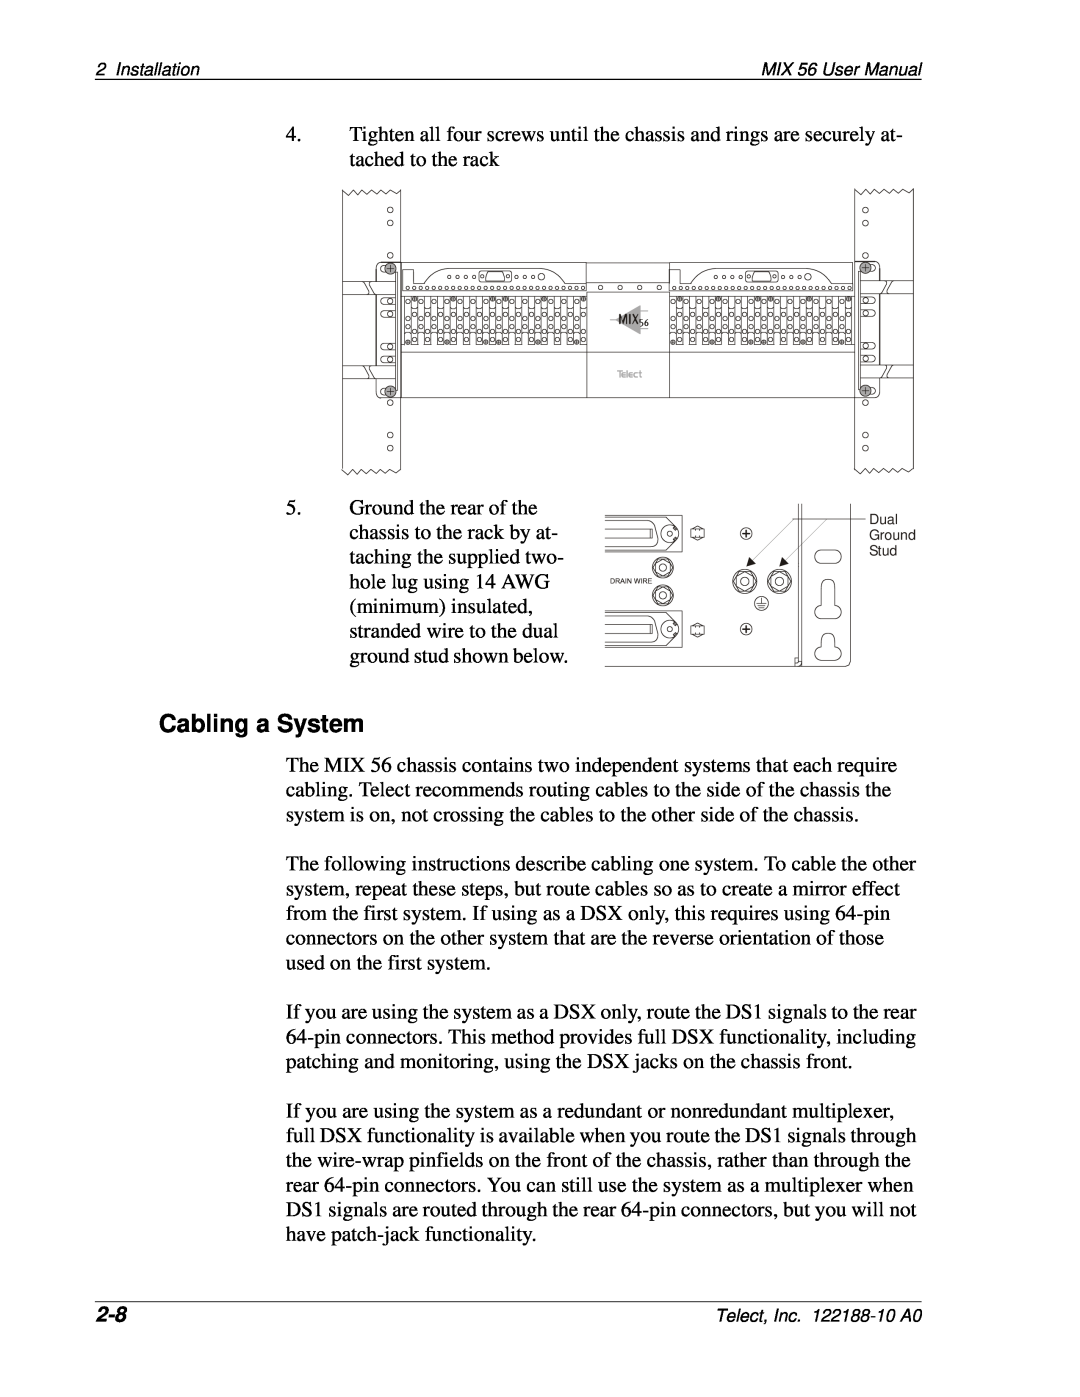 Telect MIX 56 user manual Cabling a System, Dual Ground Stud 